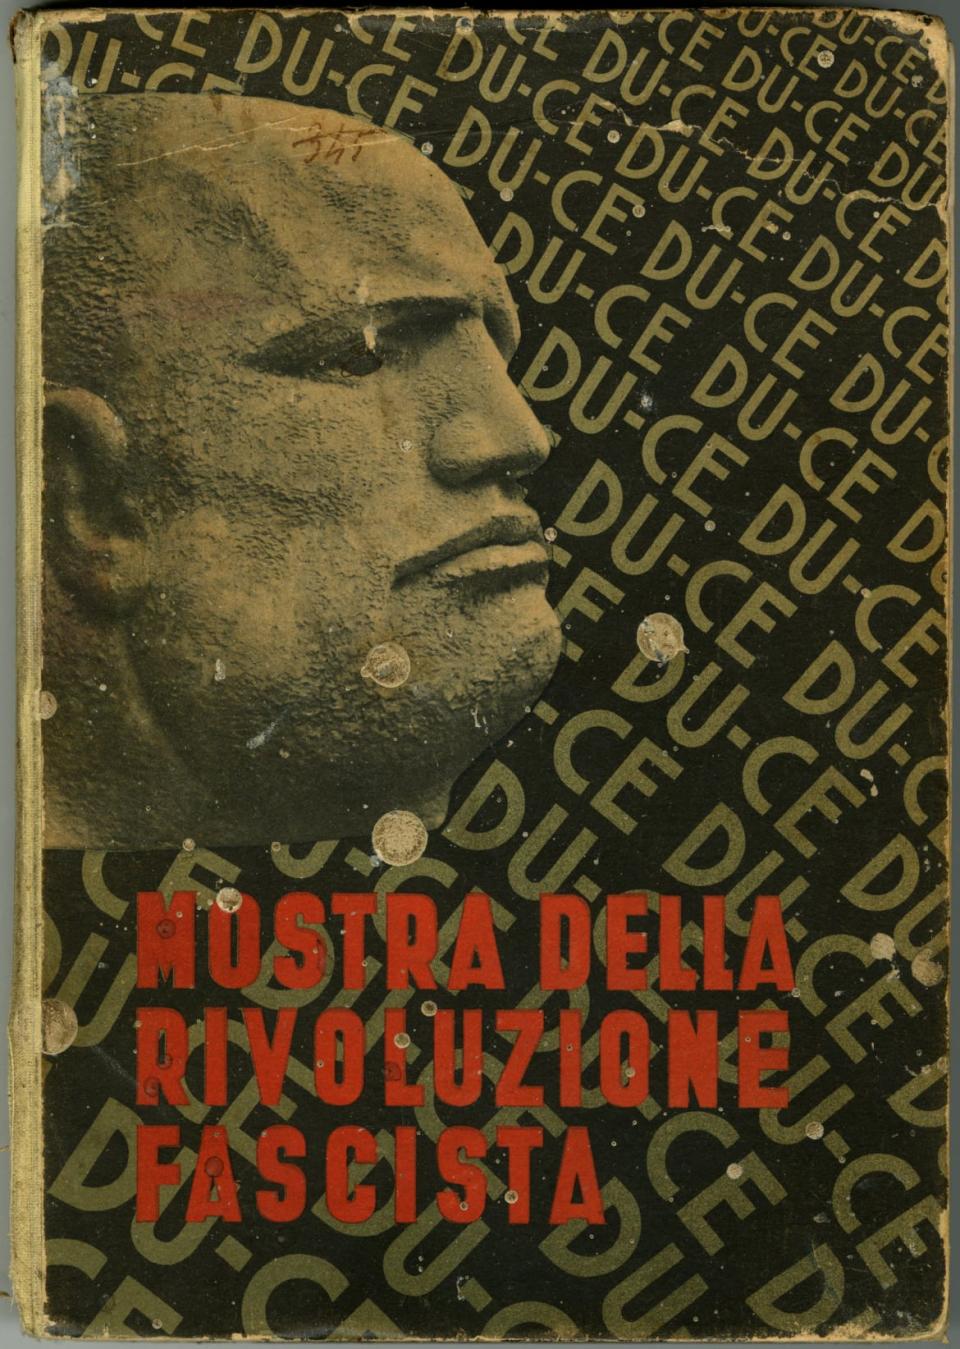 <div class="inline-image__caption"><p>Cover of the <i>Exhibition of the Fascist Revolution</i> catalogue, 1933. </p></div> <div class="inline-image__credit">Archives, Harry A.B. & Gertrude C. Shapiro Library, Southern New Hampshire University, Manchester NH.</div>